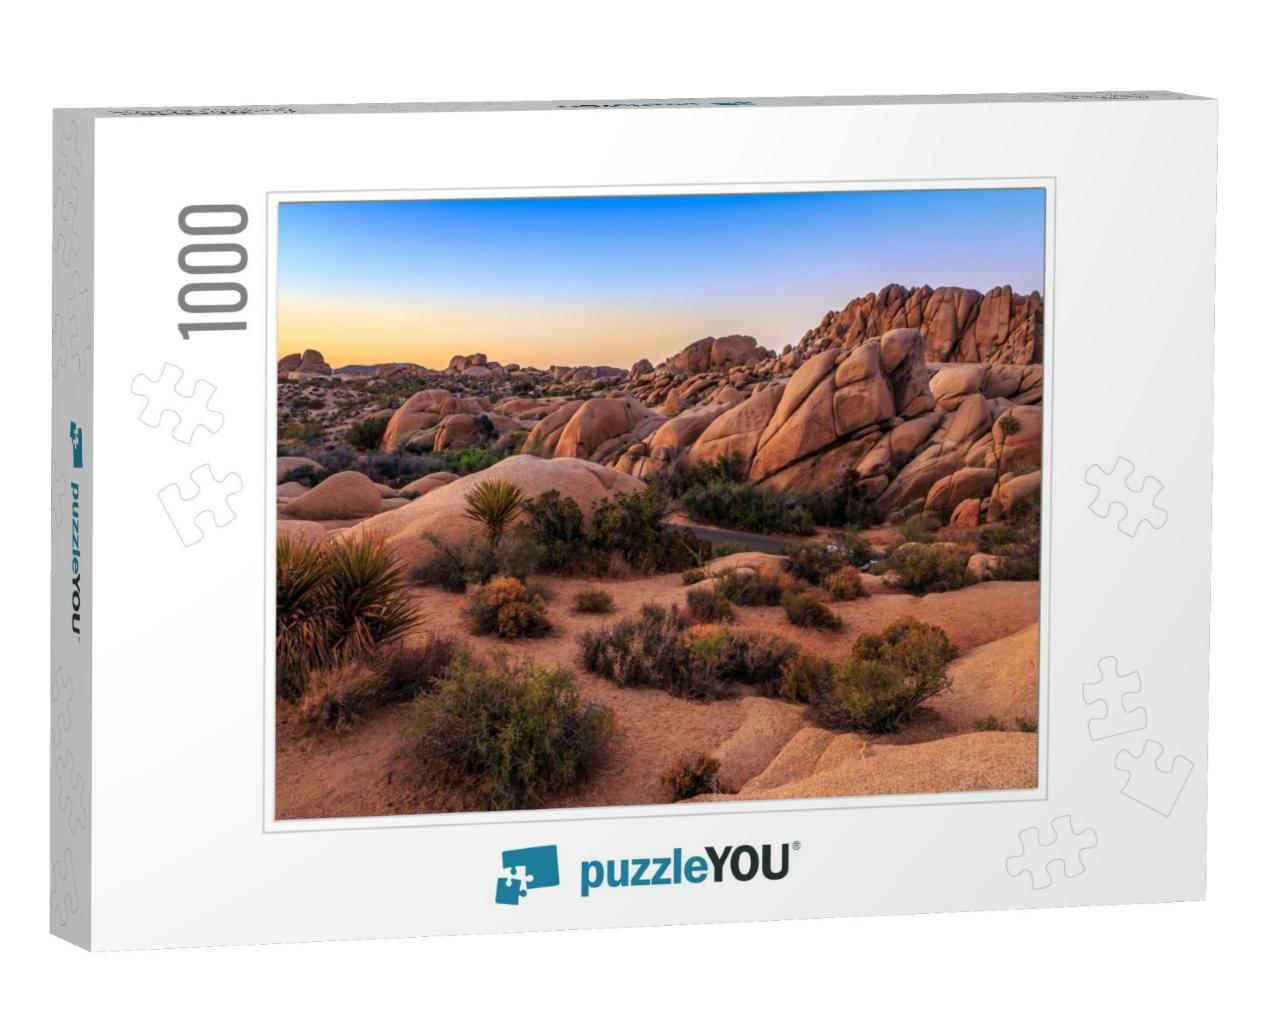 Sunset on the Jumbo Rocks, Joshua Tree National Park, Cal... Jigsaw Puzzle with 1000 pieces